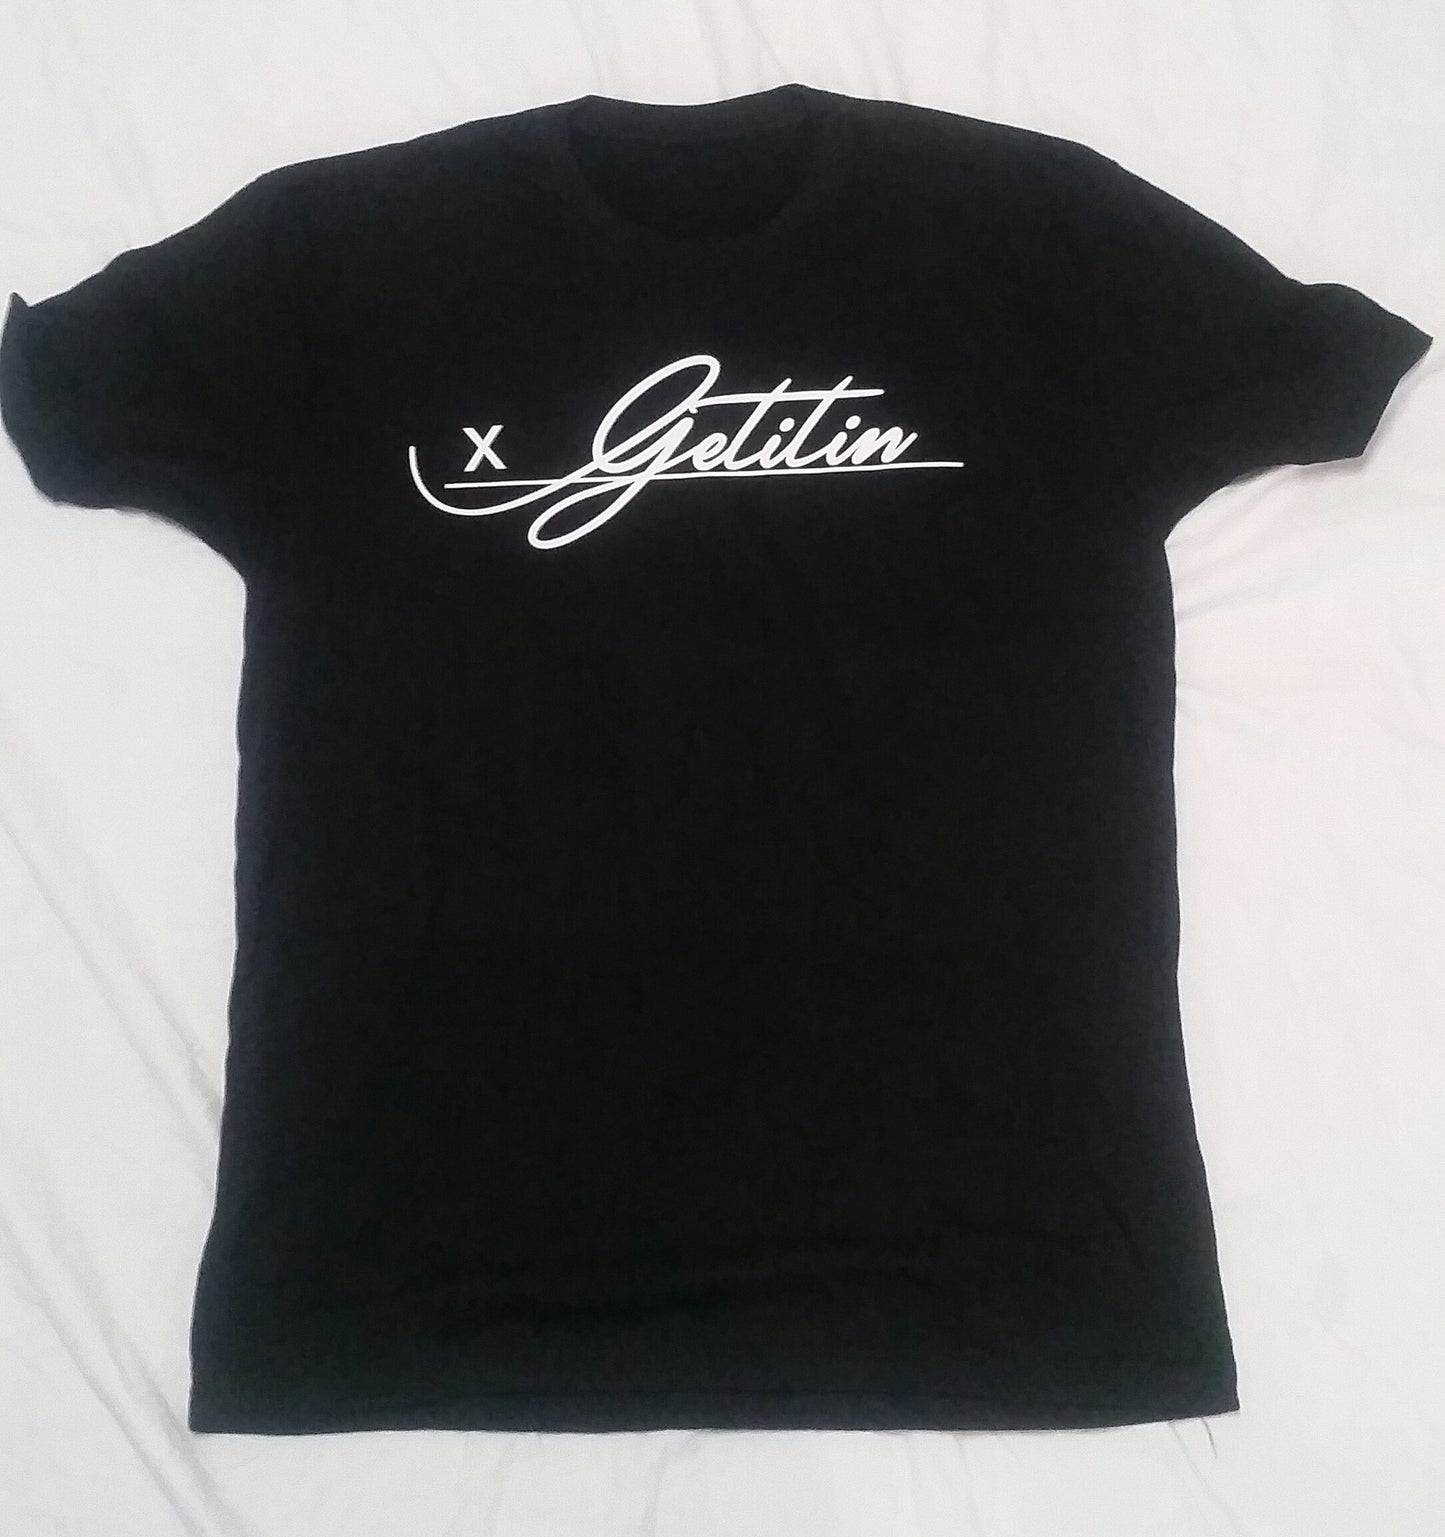 GET IT IN Signature "All on the line" T-shirt - GET IT IN Apparel